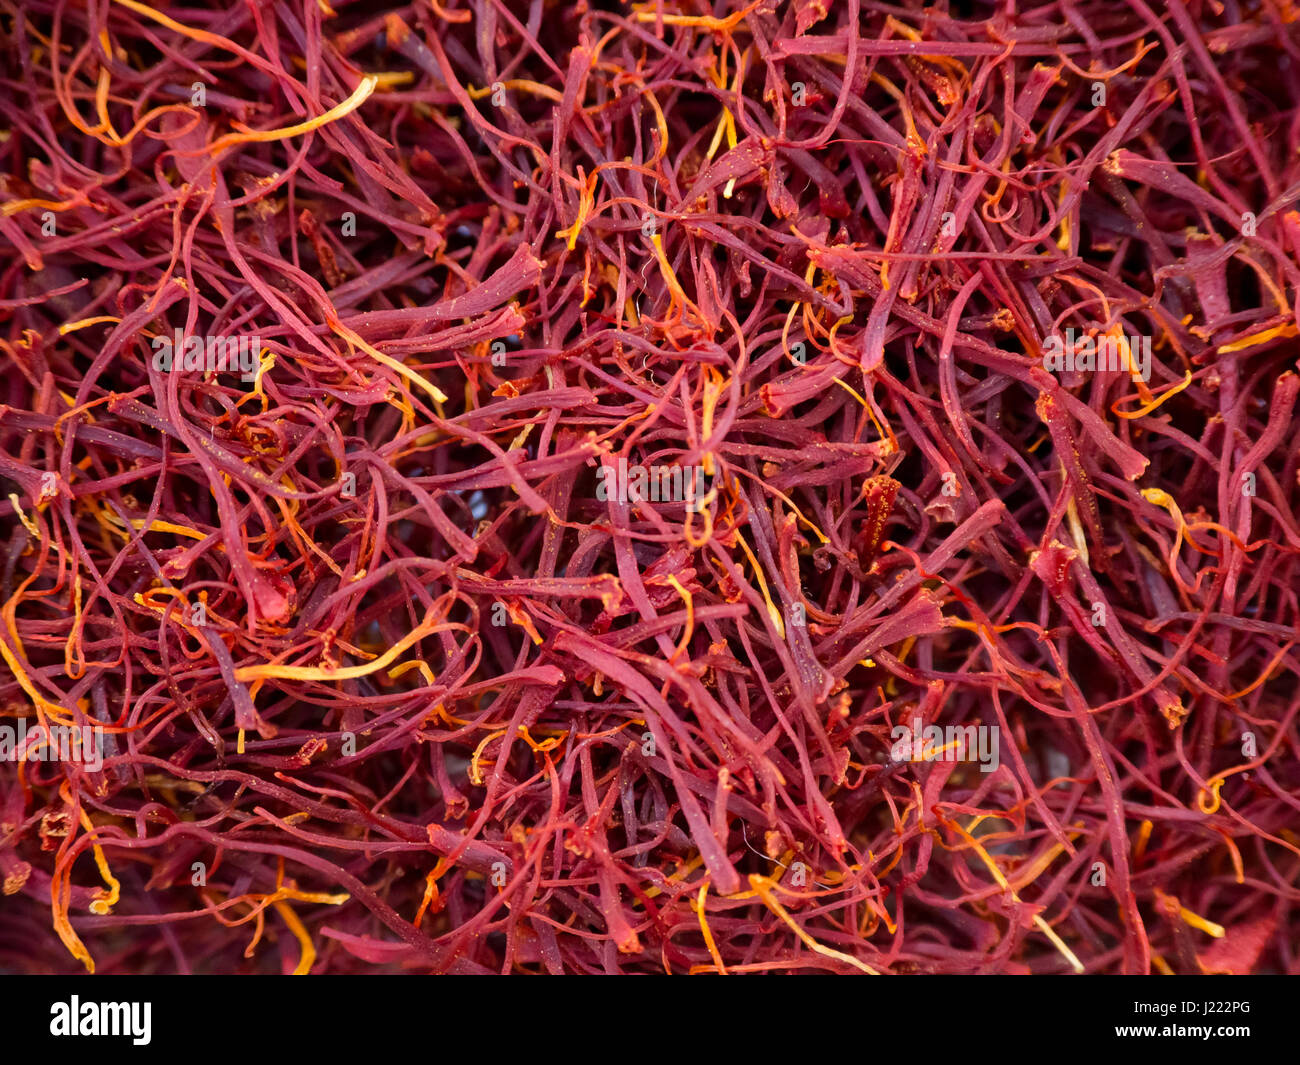 A Close up of the red spice Saffron, derived from the Crocus sativus fower. Stock Photo